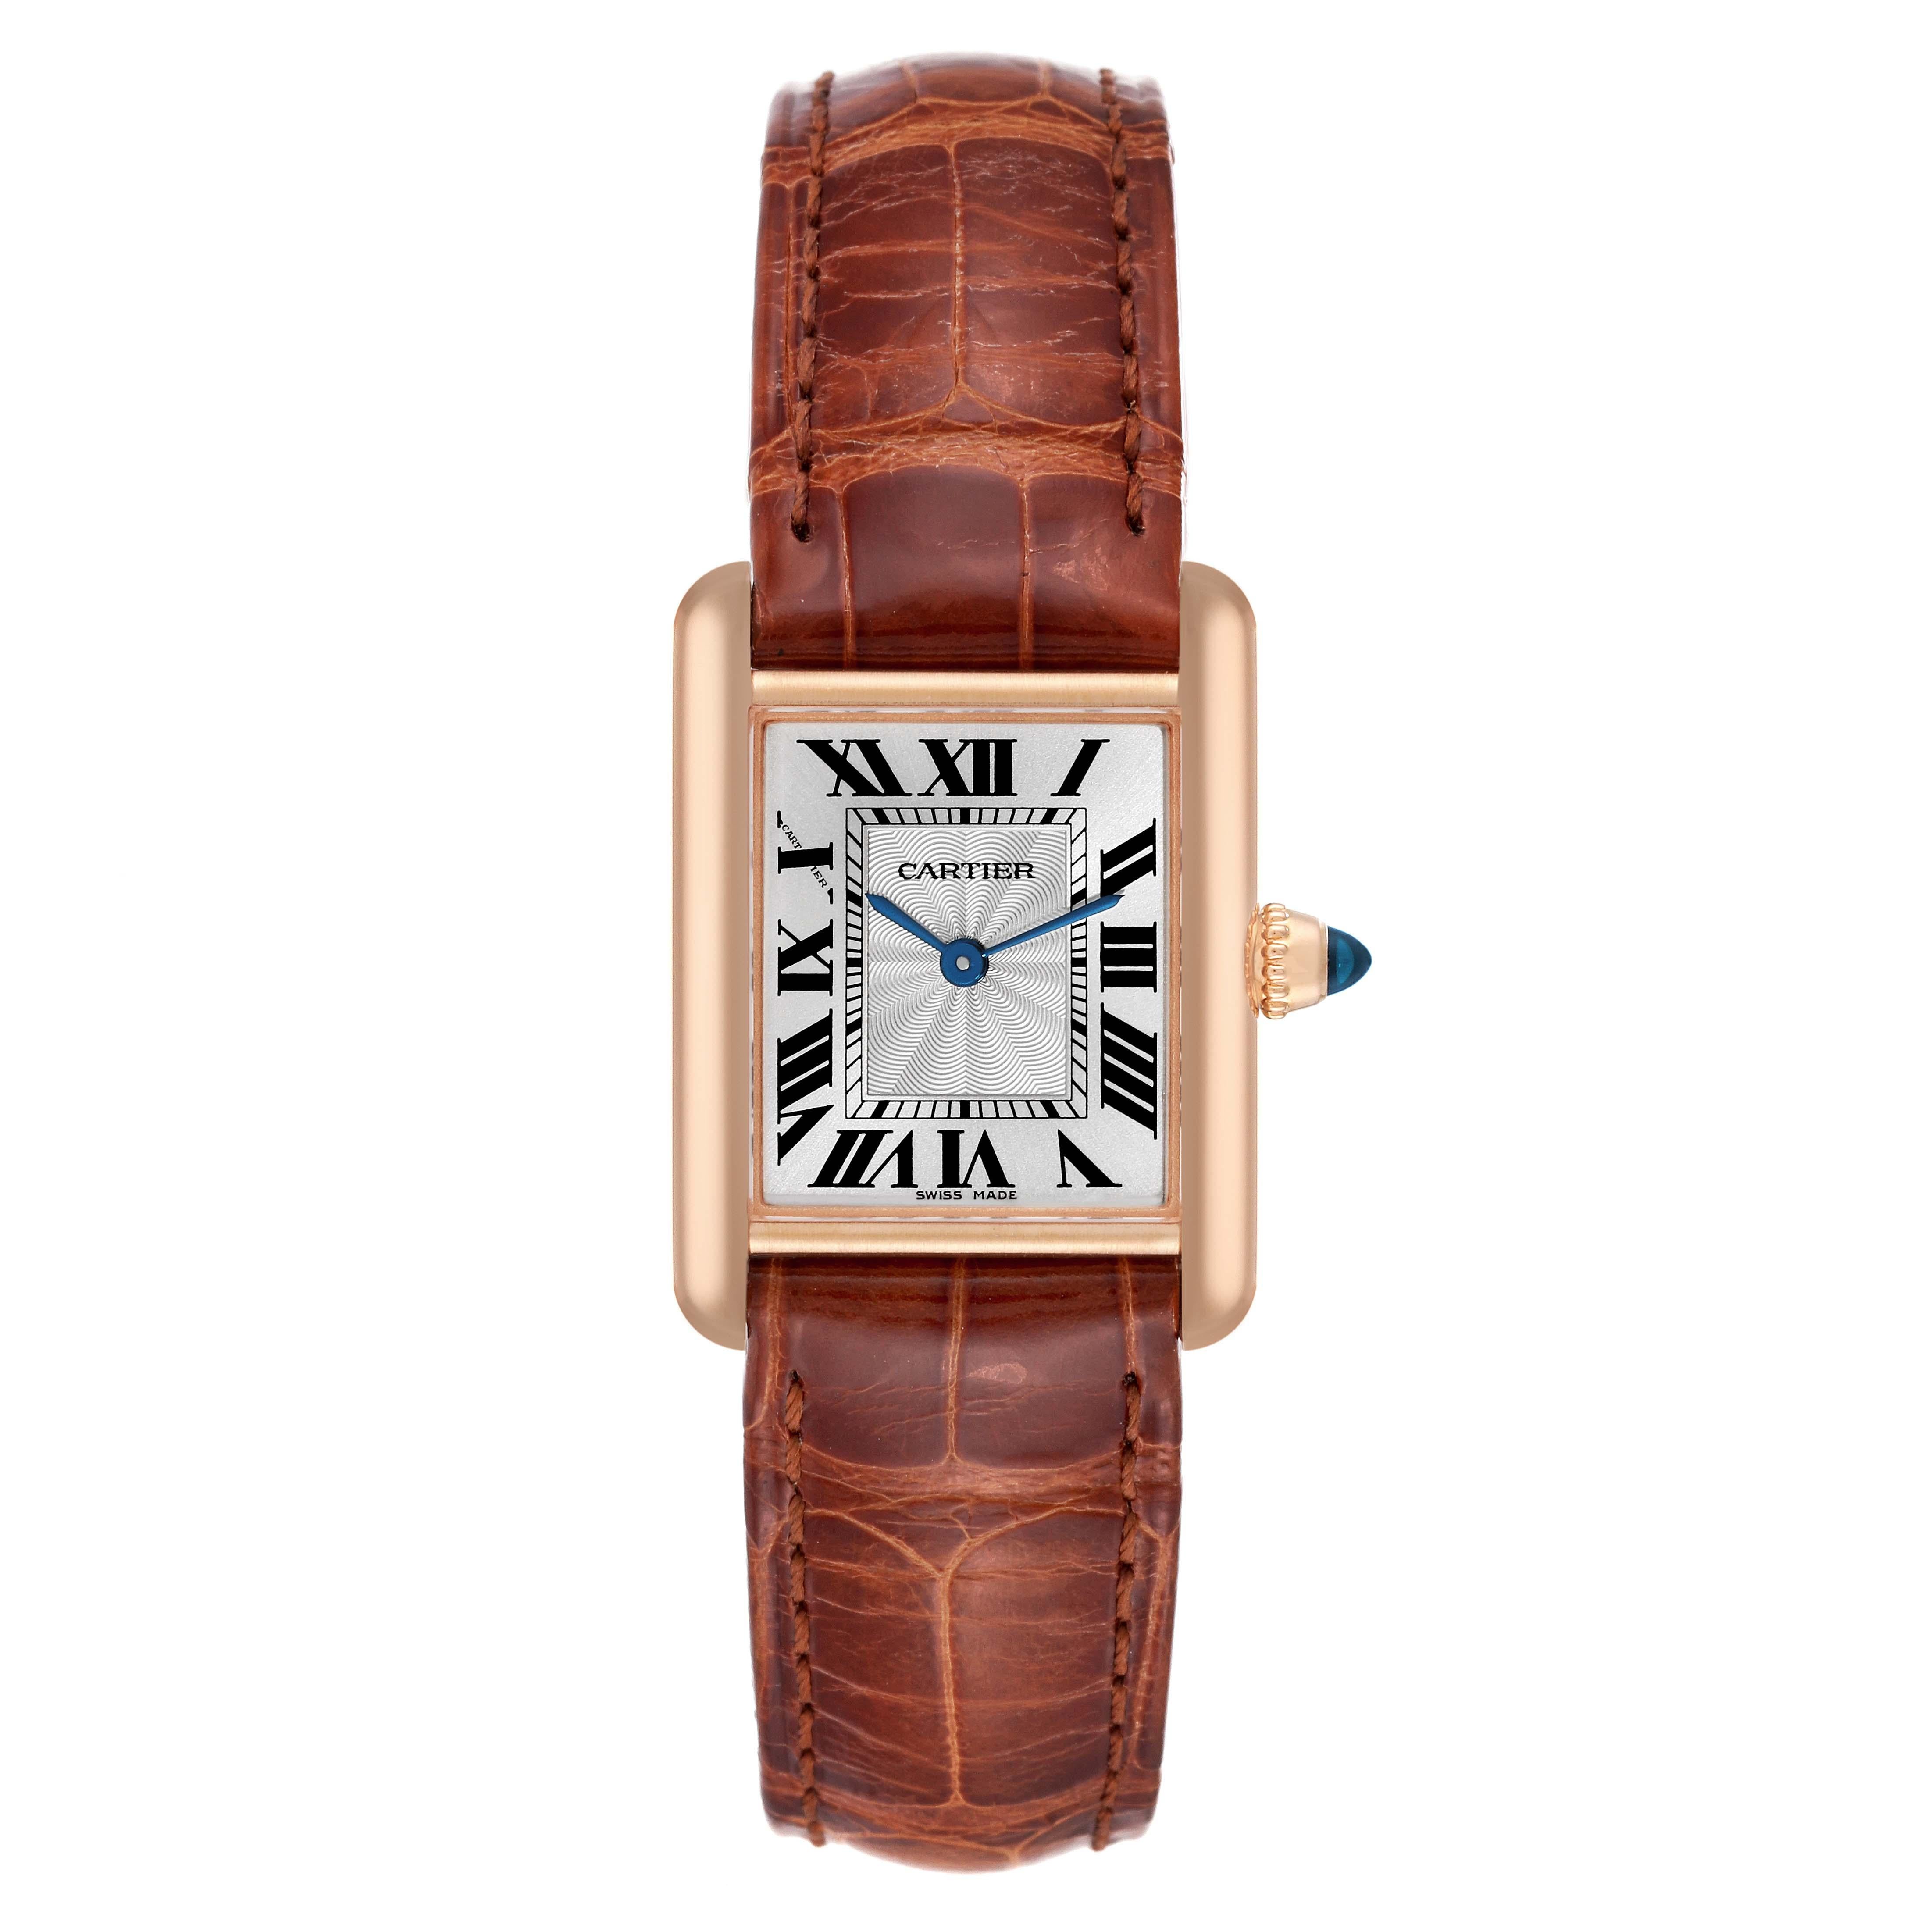 Cartier Tank Louis Rose Gold Mechanical Ladies Watch WGTA0010 Box Card. Manual winding movement. 18k rose gold case 29.5 x 22.0 mm. Circular grained crown set with the blue sapphire cabochon. . Scratch resistant sapphire crystal. Silvered guilloche